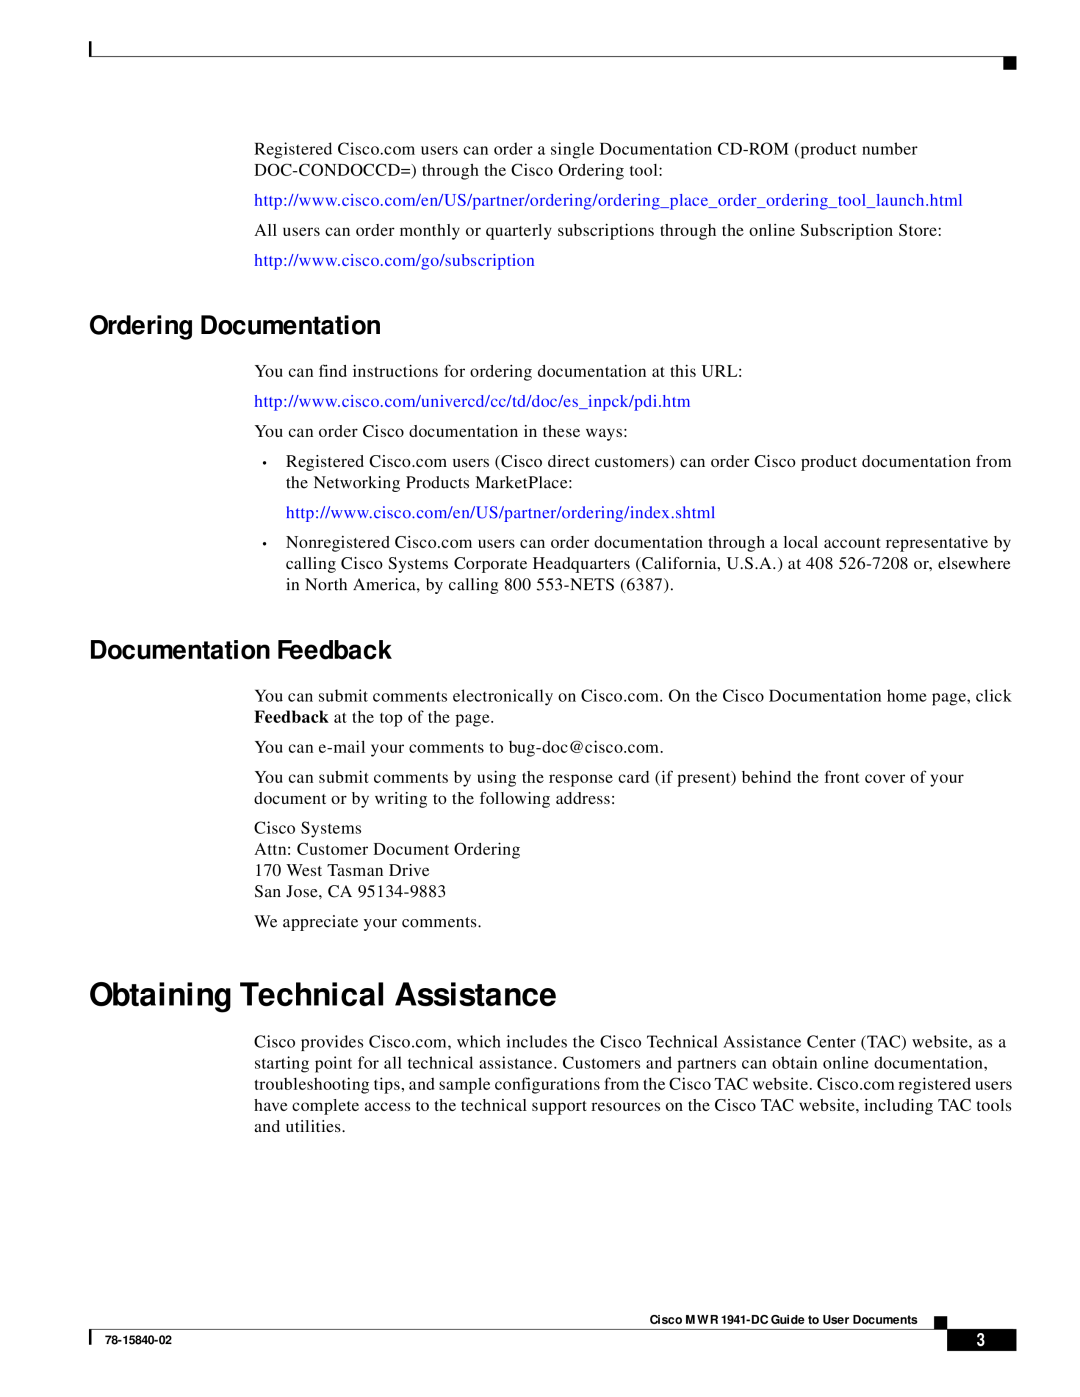 Cisco Systems 1941-DC configurationmanual Obtaining Technical Assistance, Ordering Documentation, Documentation Feedback 